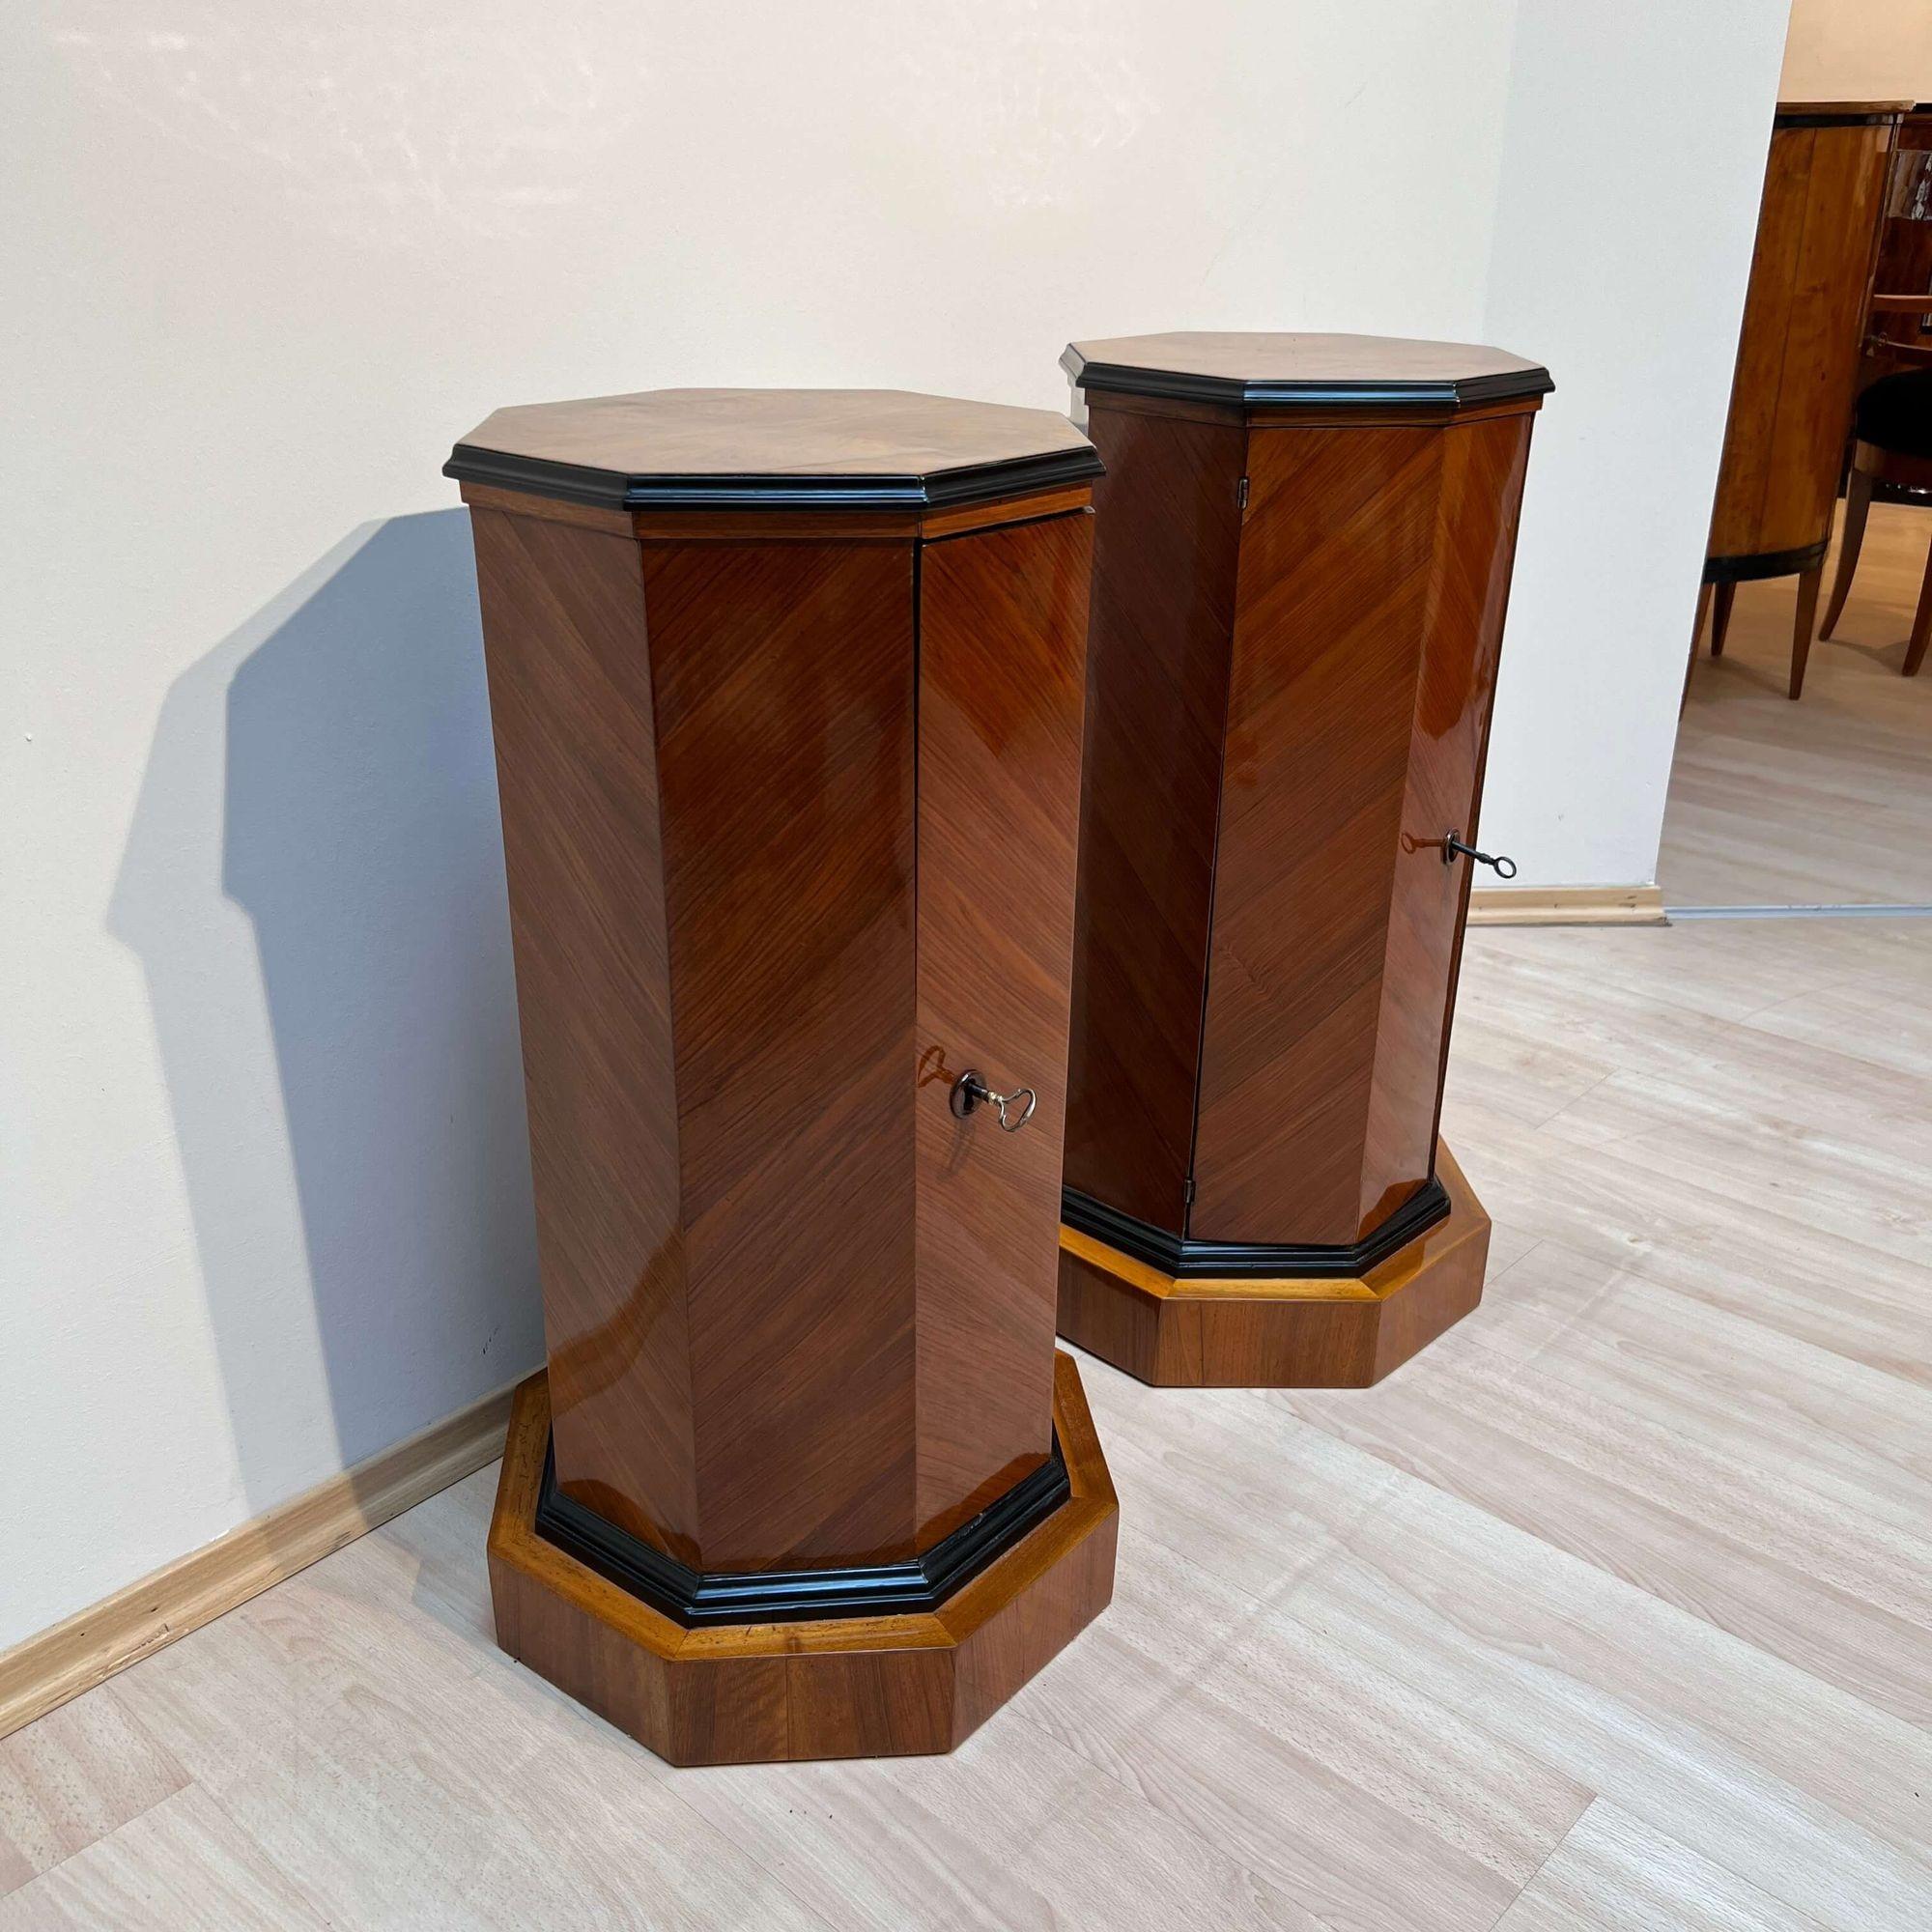 Polished Pair of Neoclassical Drum Cabinets, Walnut Veneer, Italy, circa 1830